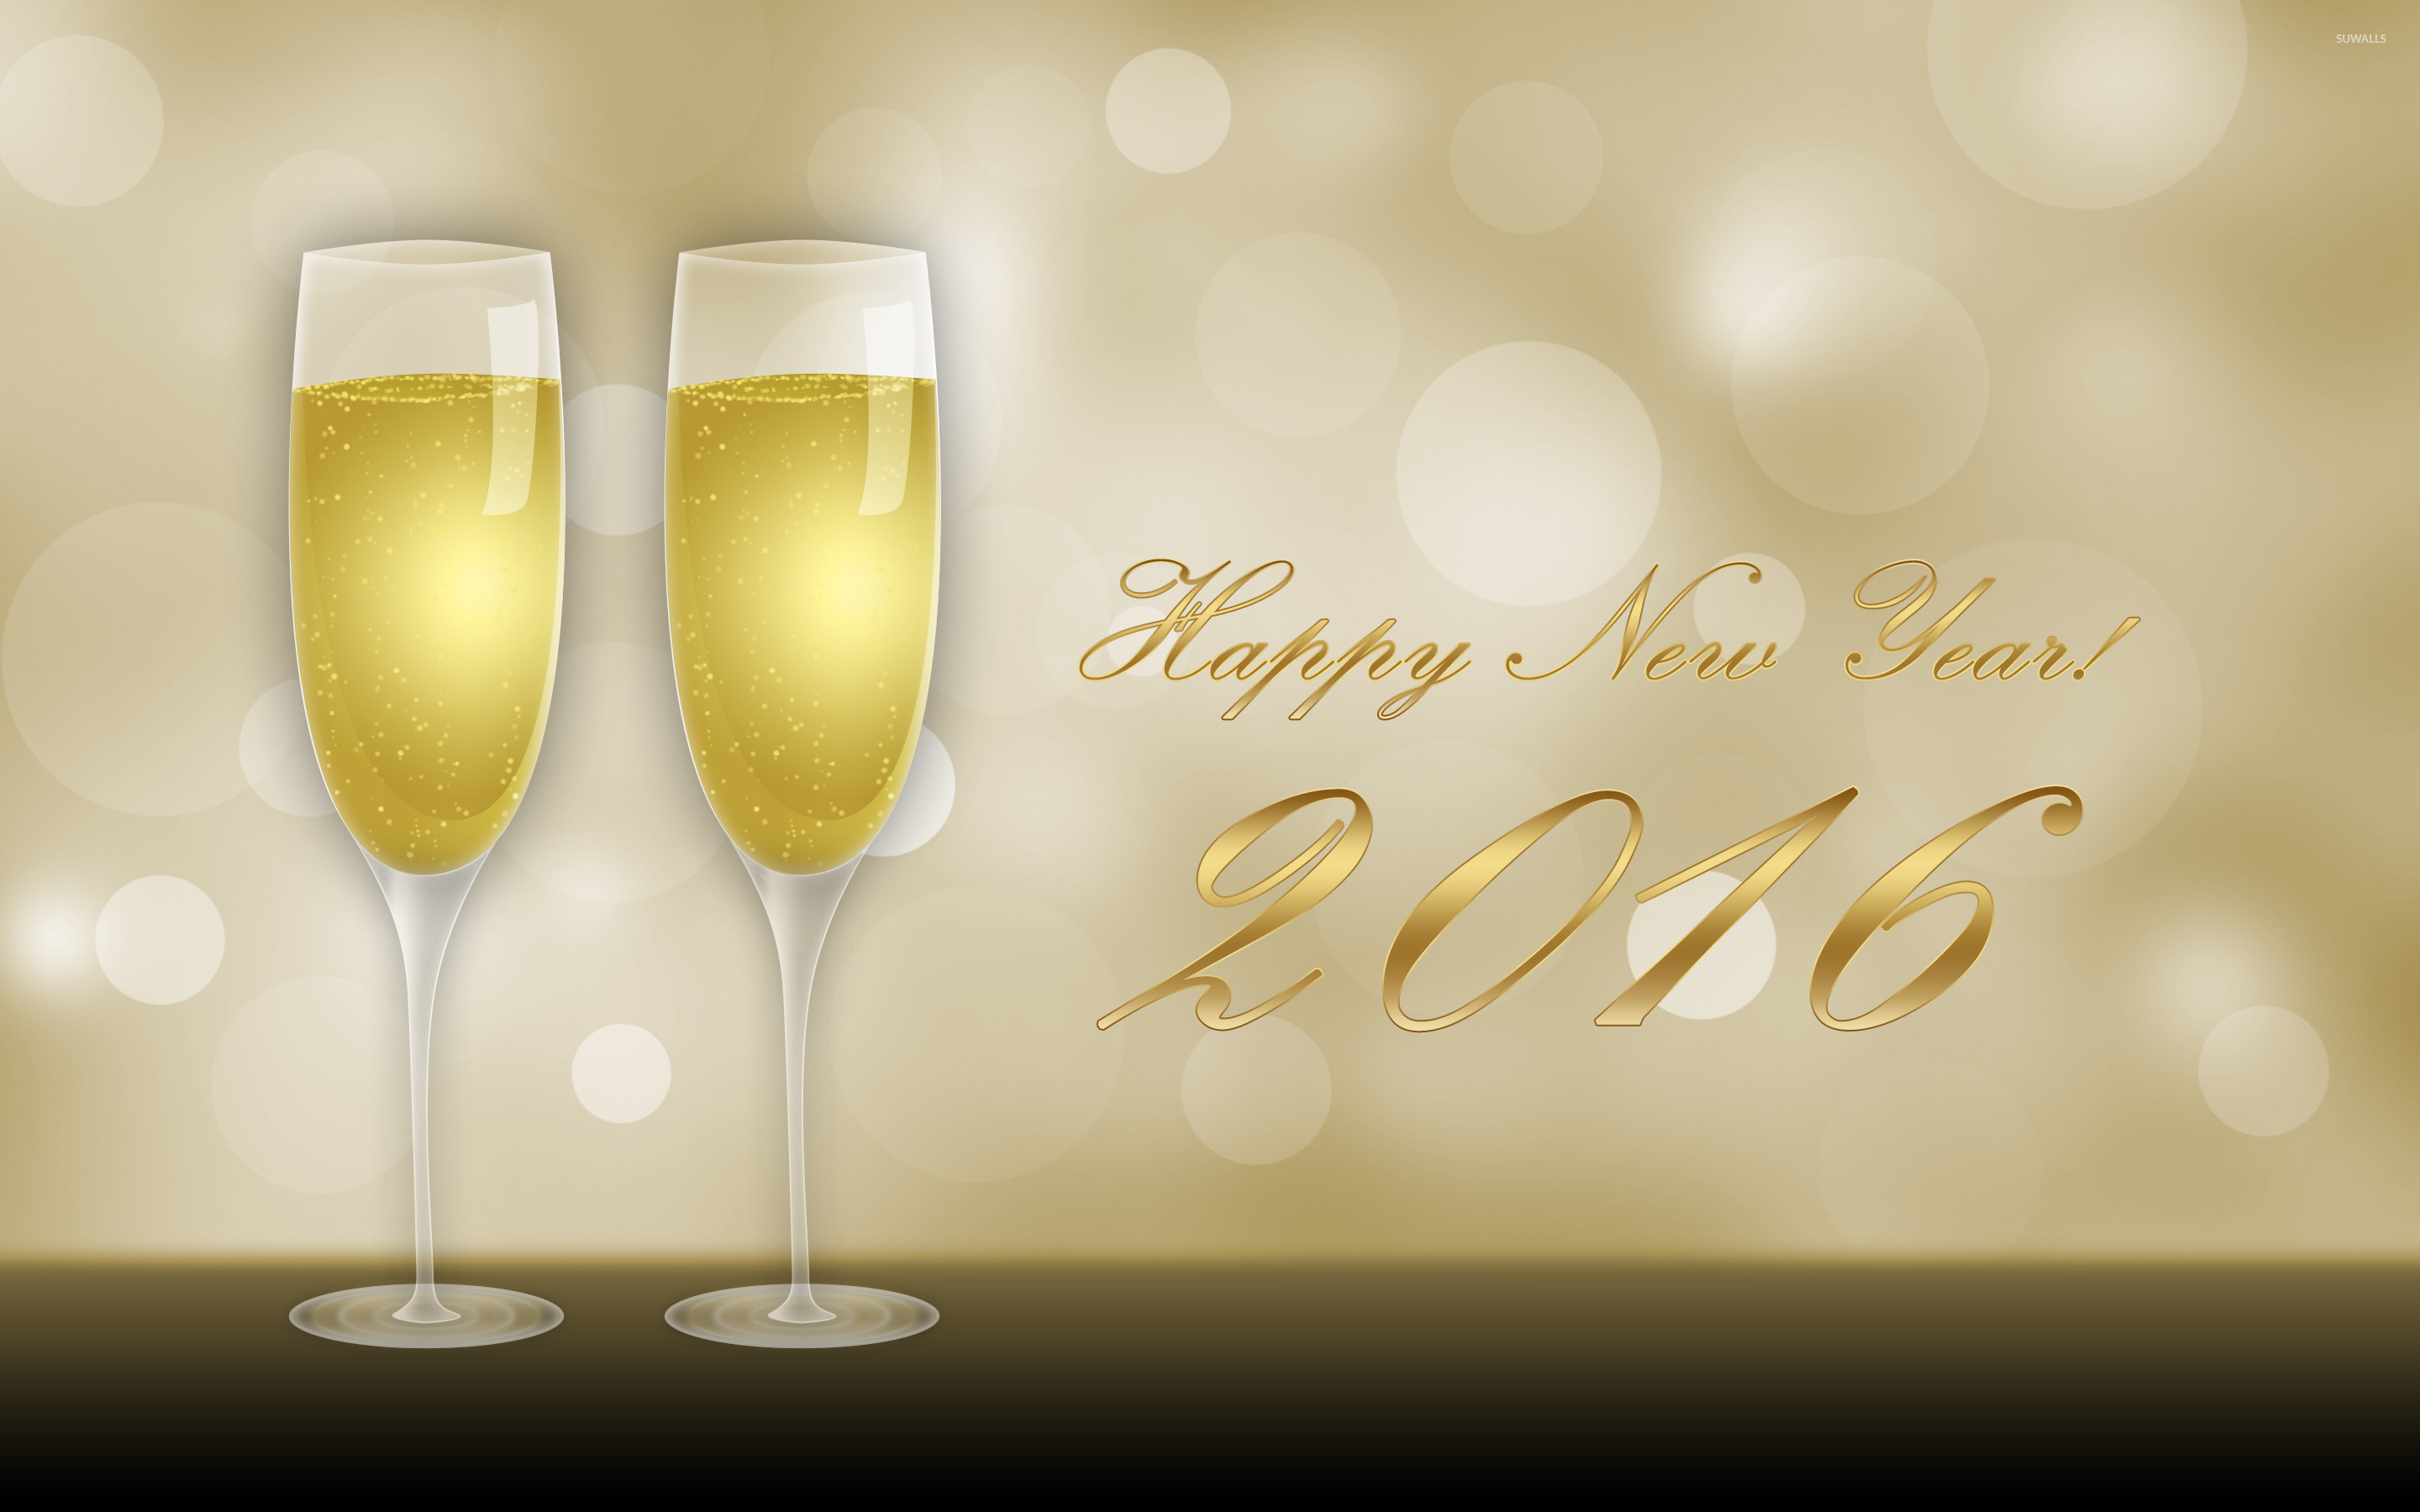 2880x1800 Champagne glasses on New Year's Eve wallpaper